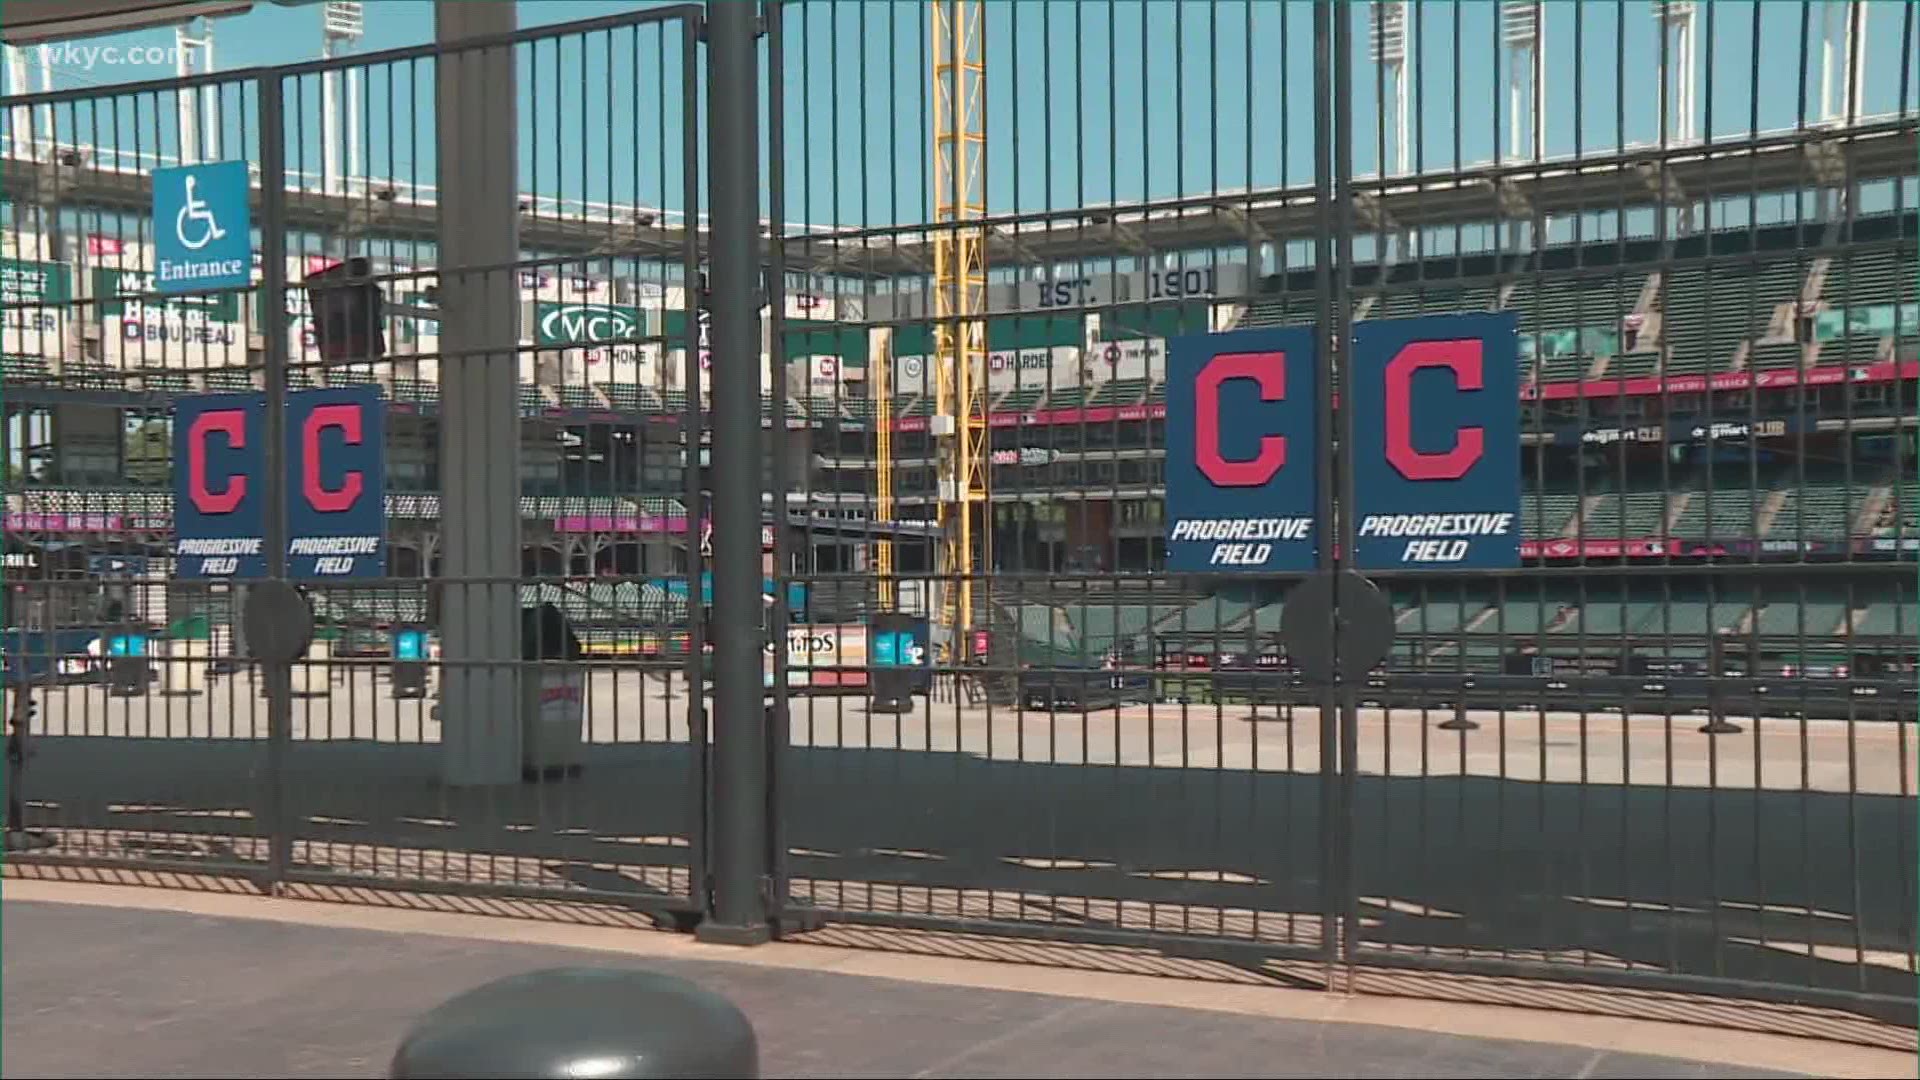 What will it be like when the Cleveland Indians begin their shortened baseball season? Here's a sneak peek at what you can expect.